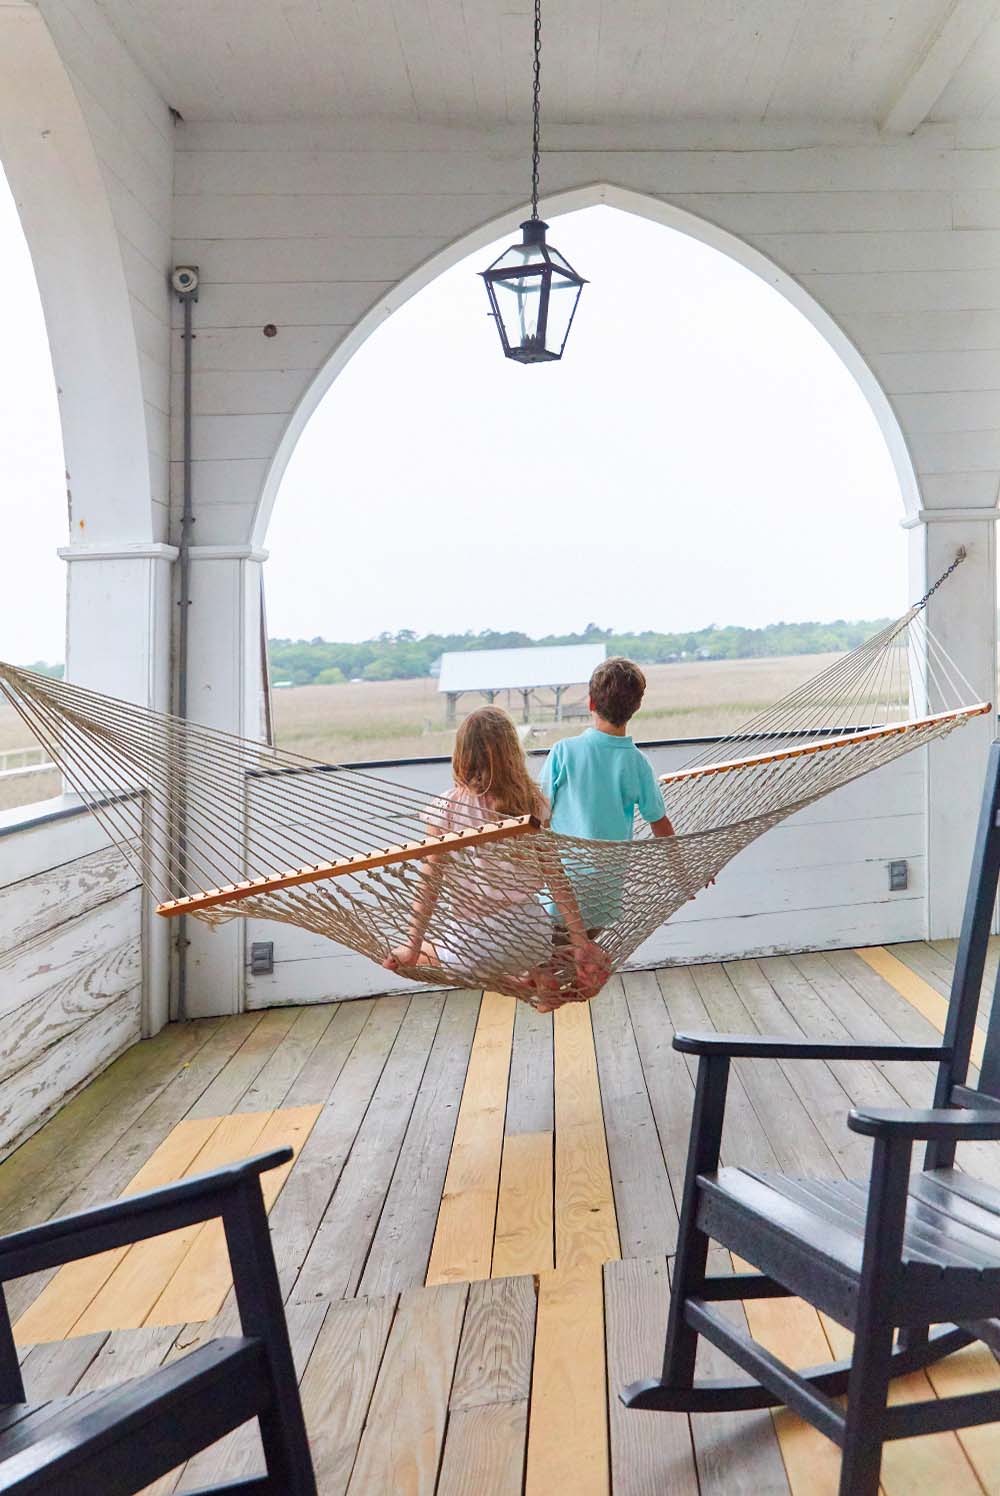 A young boy and girl sit together in a hammock on the Pelican Inn’s porch overlooking the marshwaters on Pawleys Island, South Carolina.